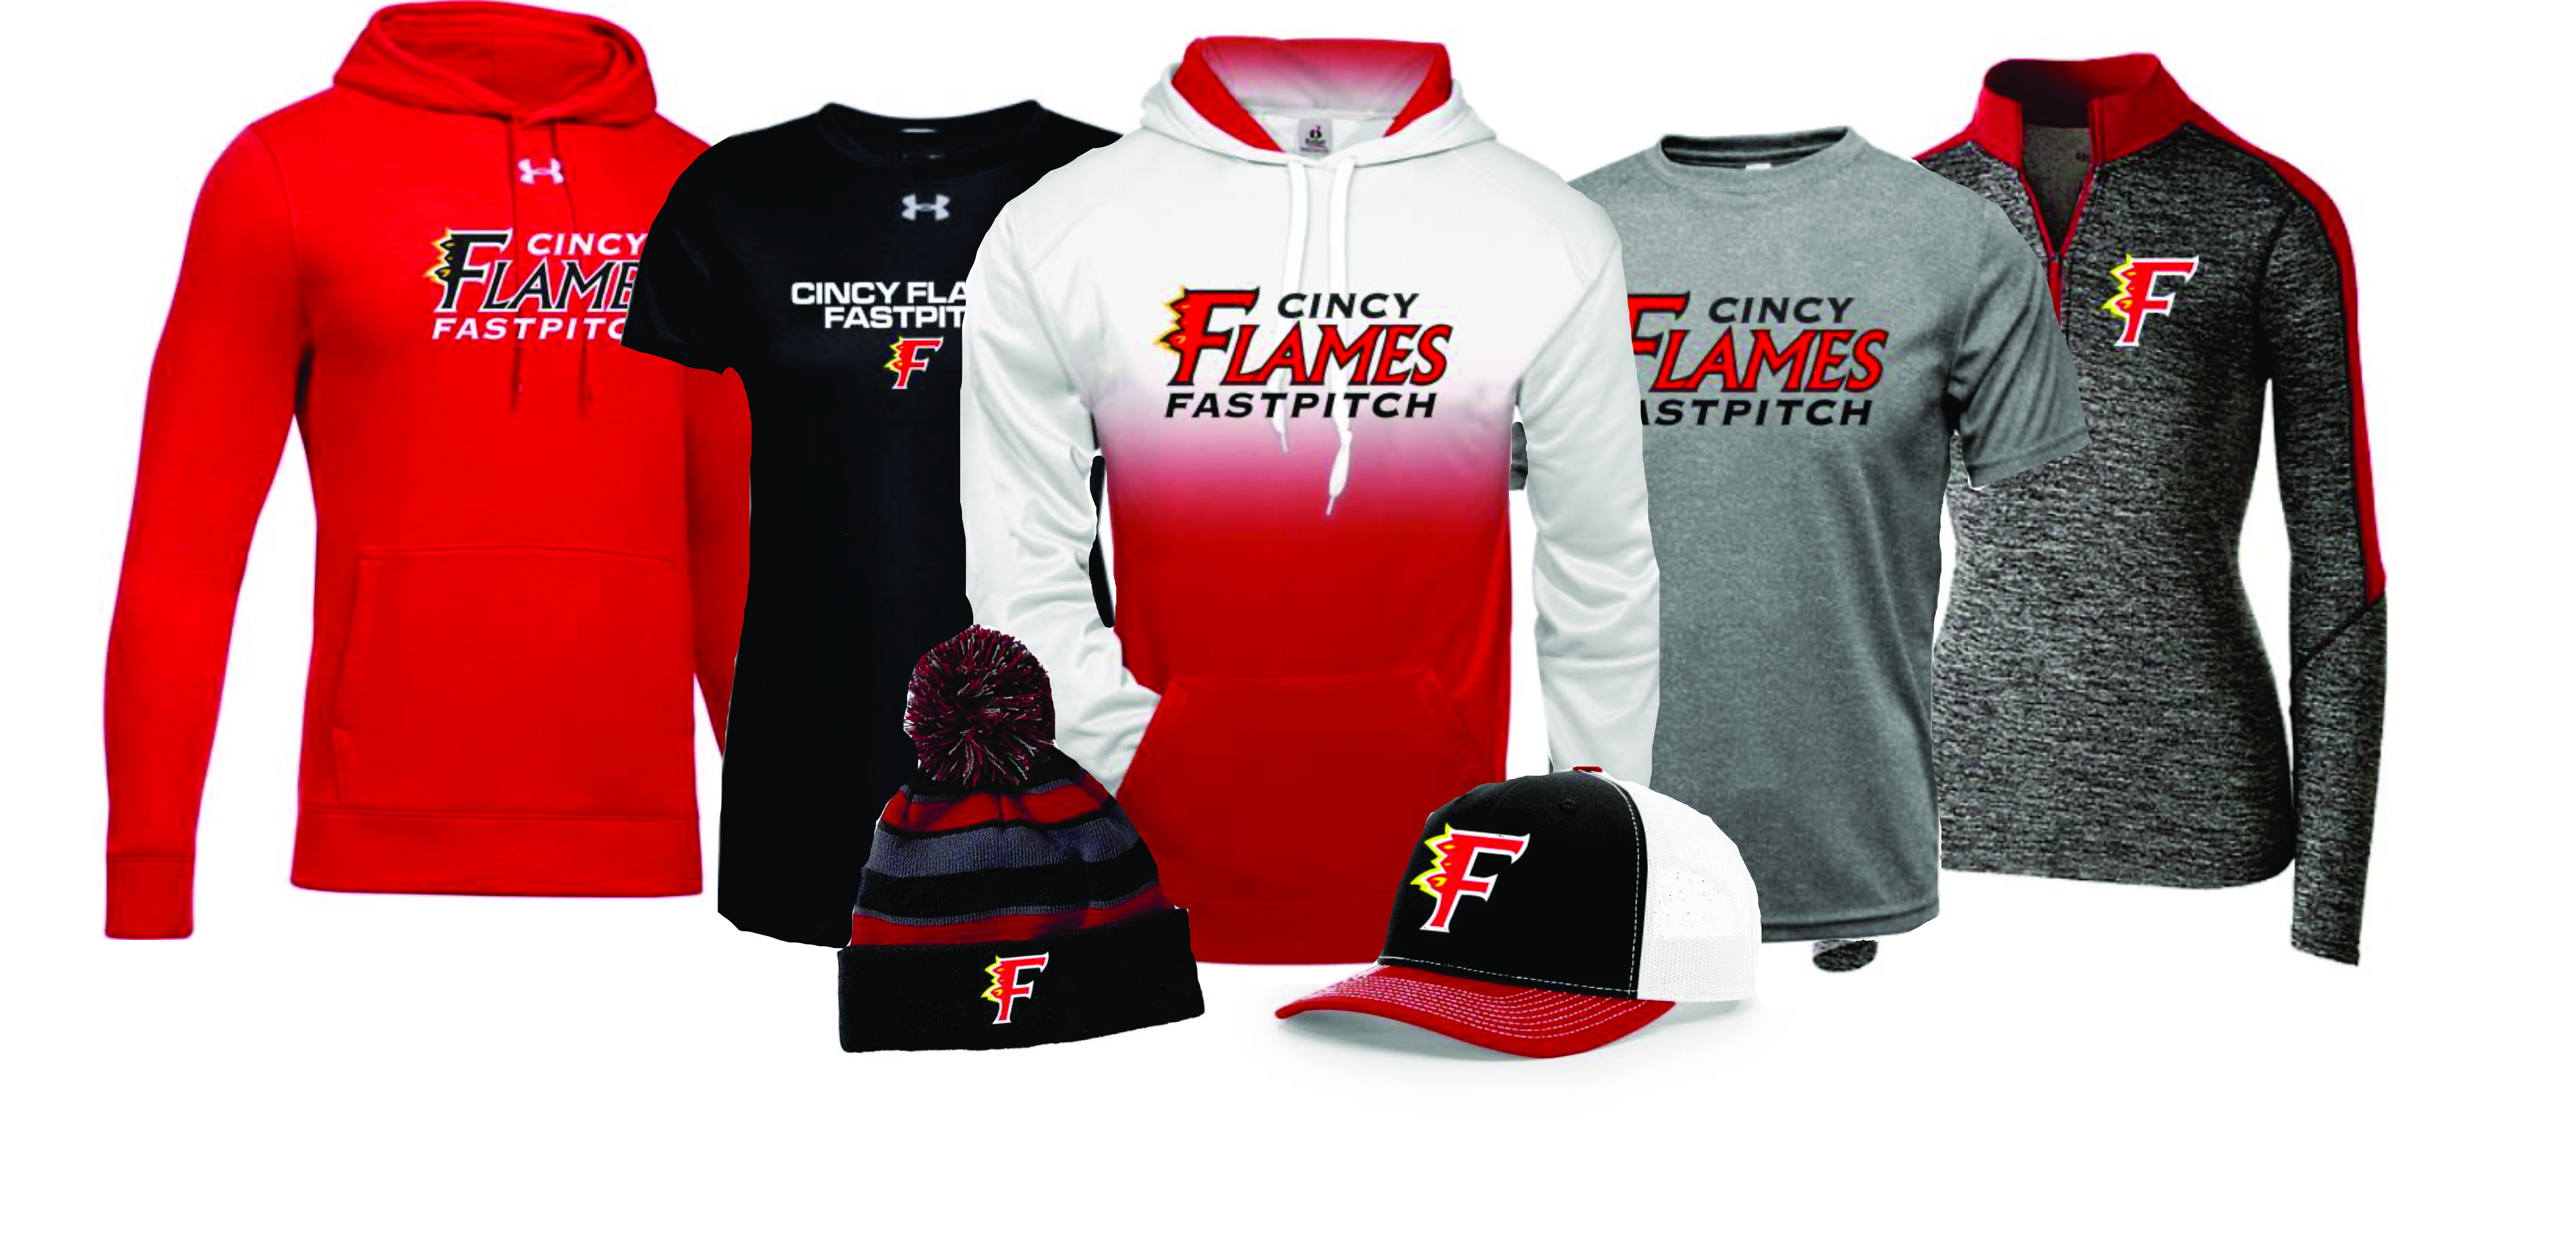 flames-fastpitch-order-now.jpg